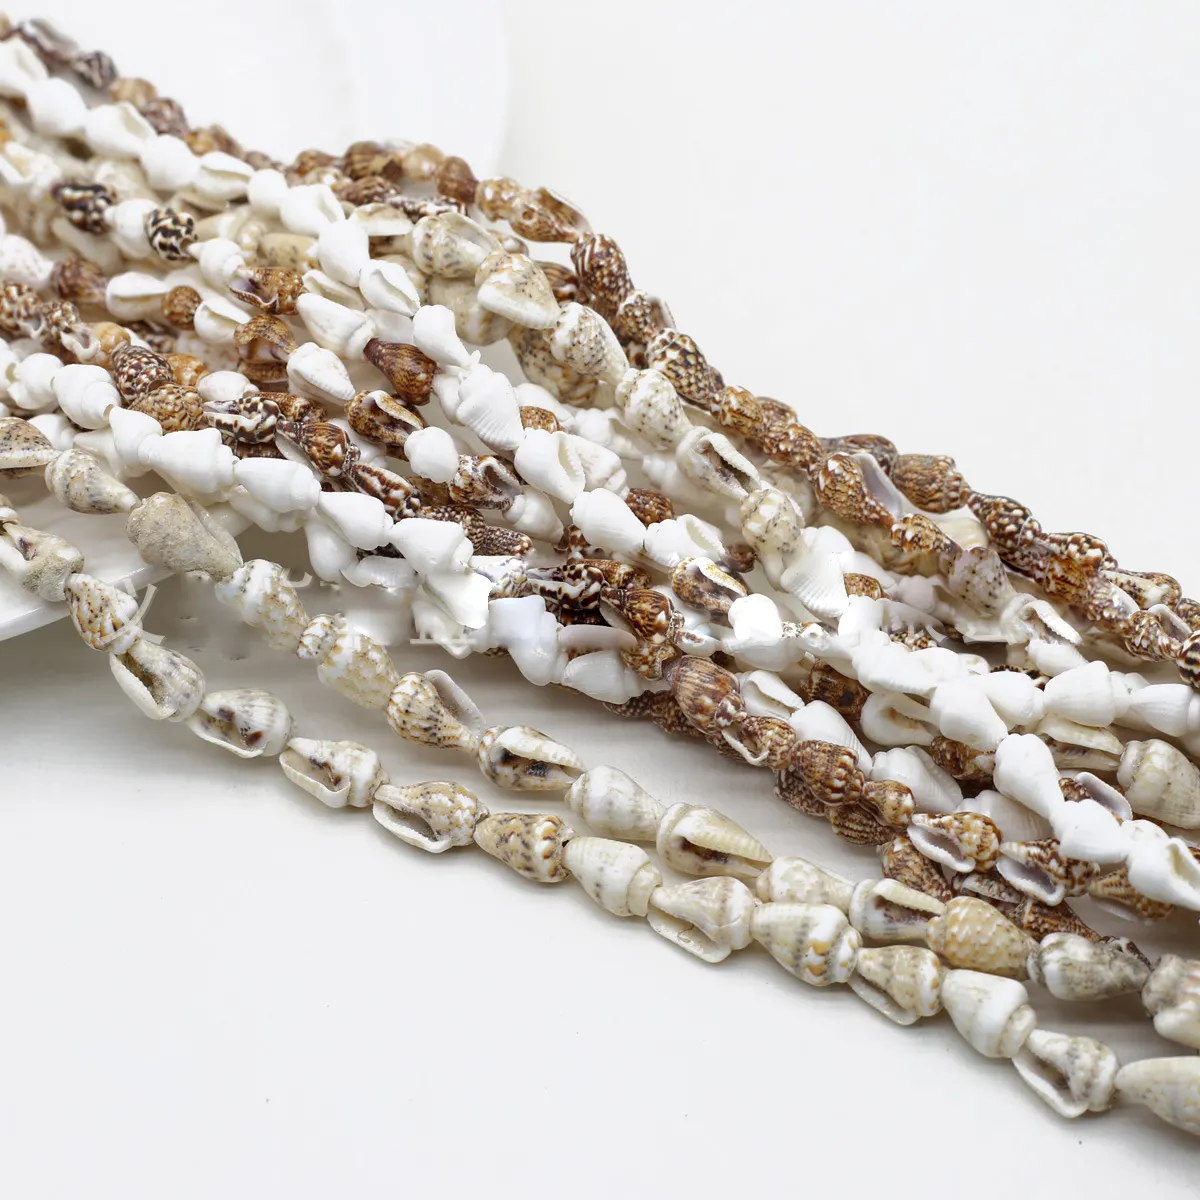 Wholesale Natural Seashell Small Shell Conch and Cowrie Beads Strand for Handmade DIY Jewelry, Bracelet Necklace